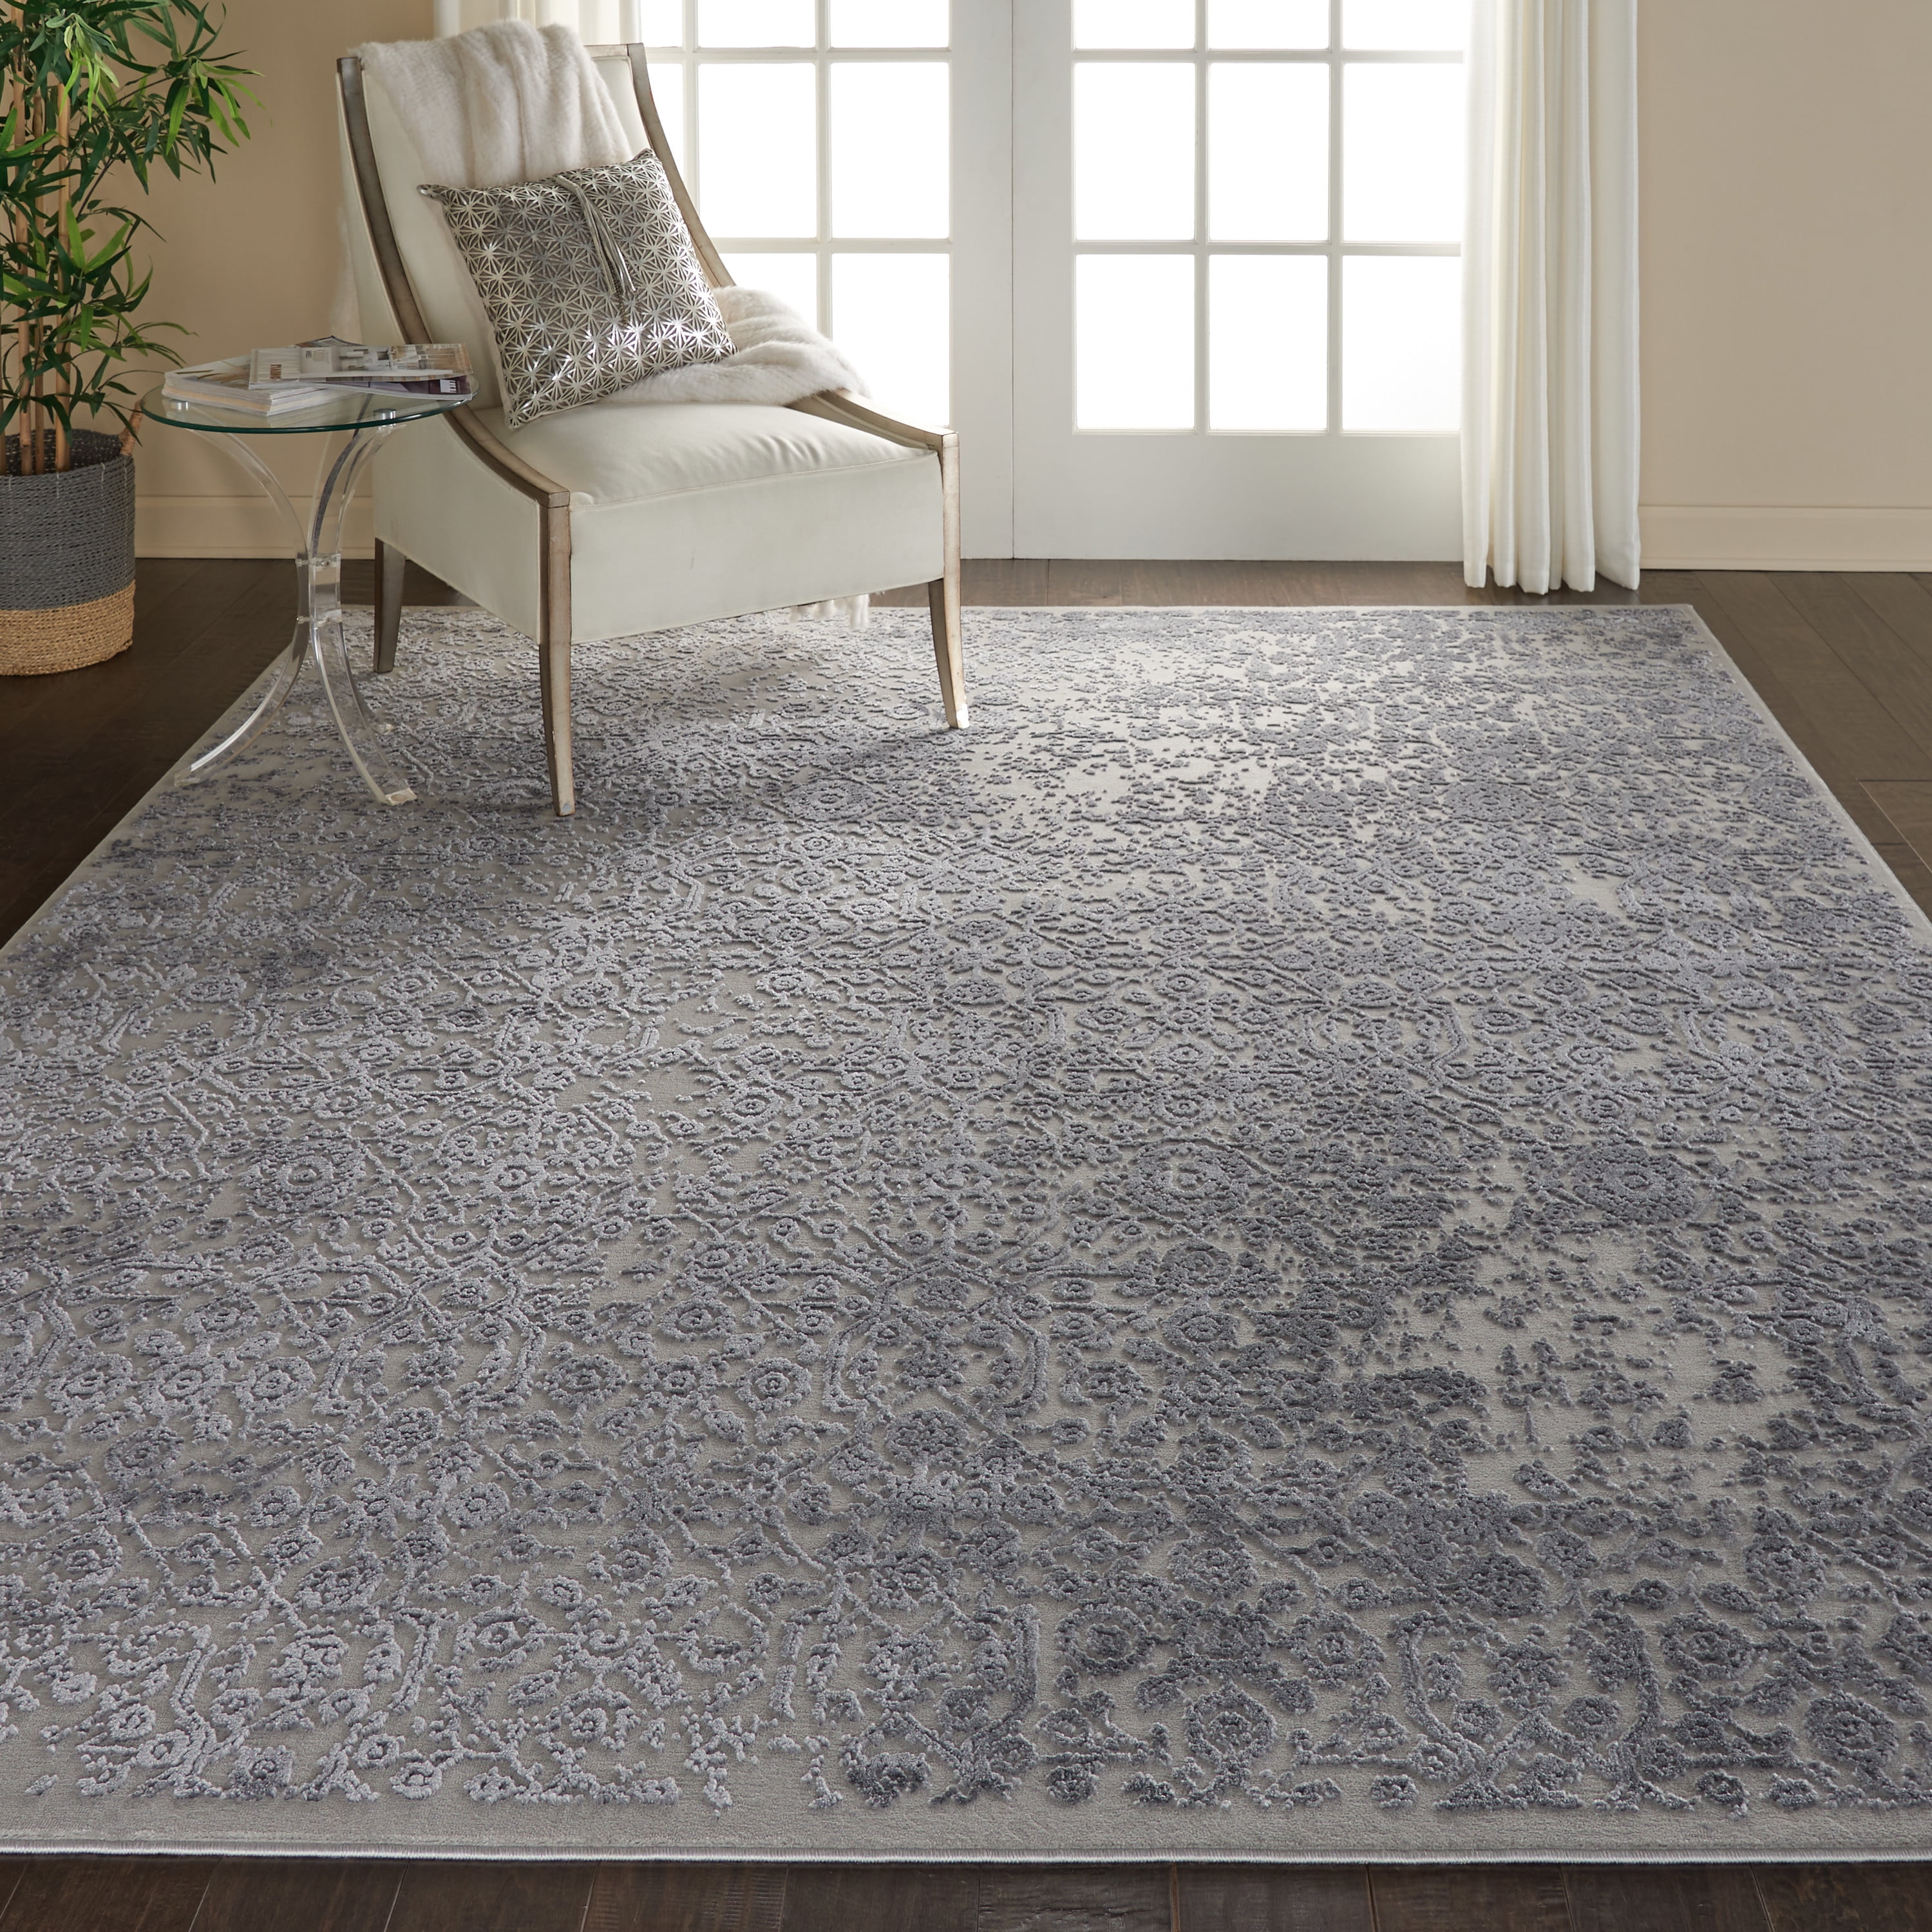 Slate Blue And White French Country, French Country Rugs